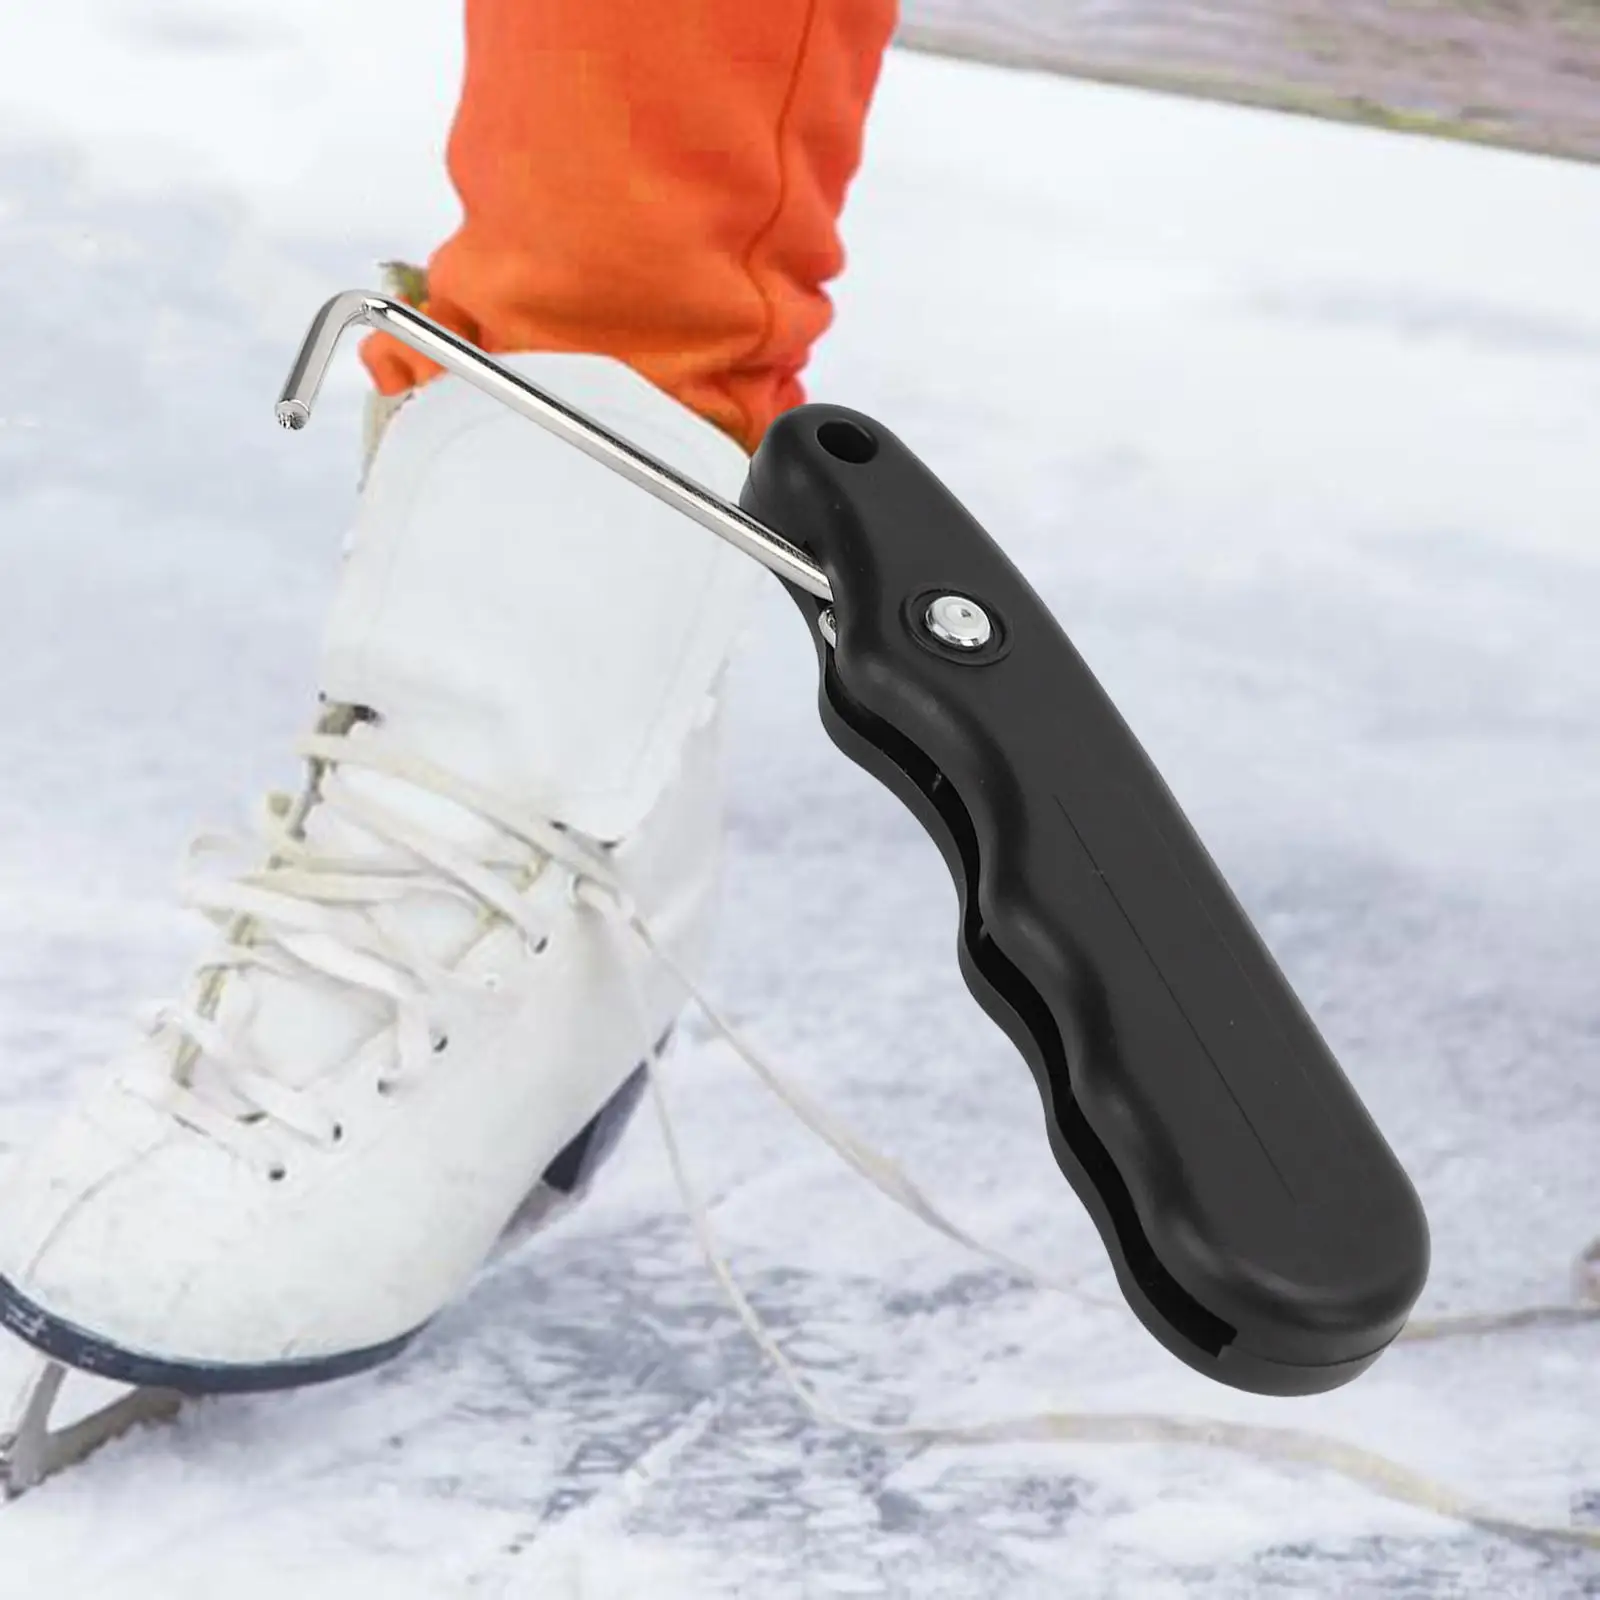 Ice Skate Lace Tightener Folding Convenient Durable Portable Multiuse Handheld Practical for Outdoor Activities Ice Skates